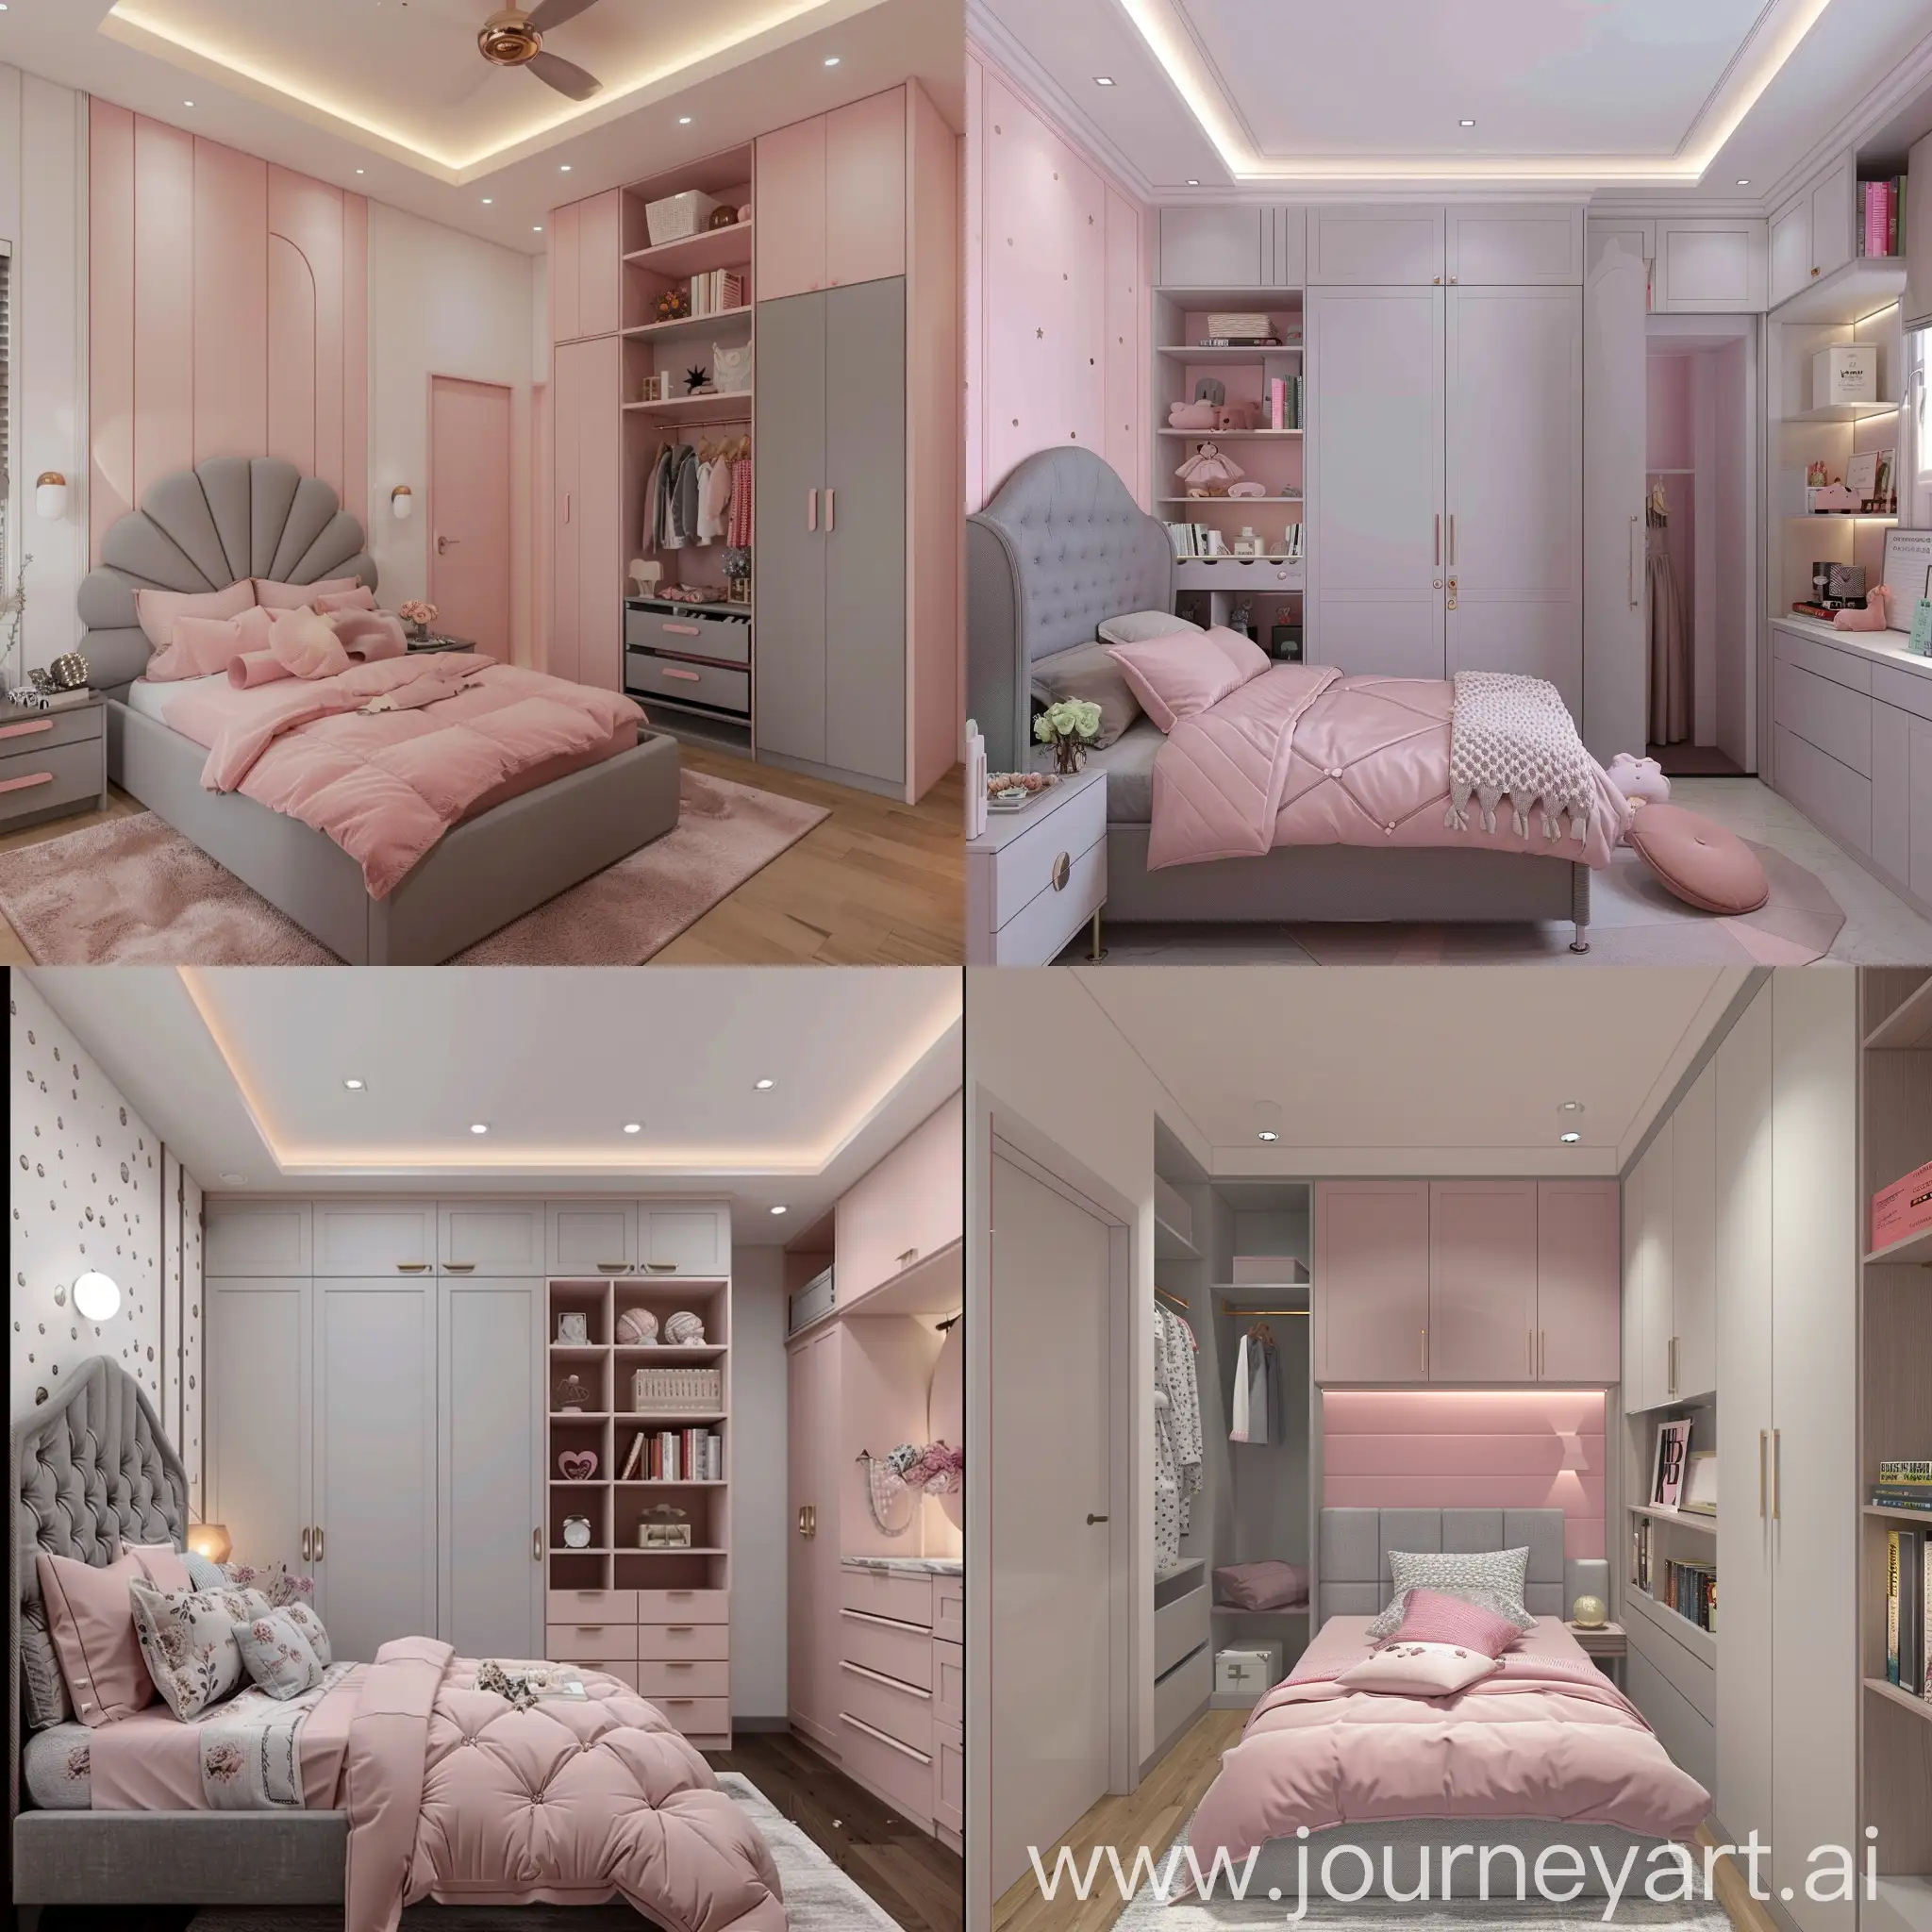 Light-Pink-Girls-Bedroom-with-Grey-Furniture-and-RomanThemed-Wall-Bedding